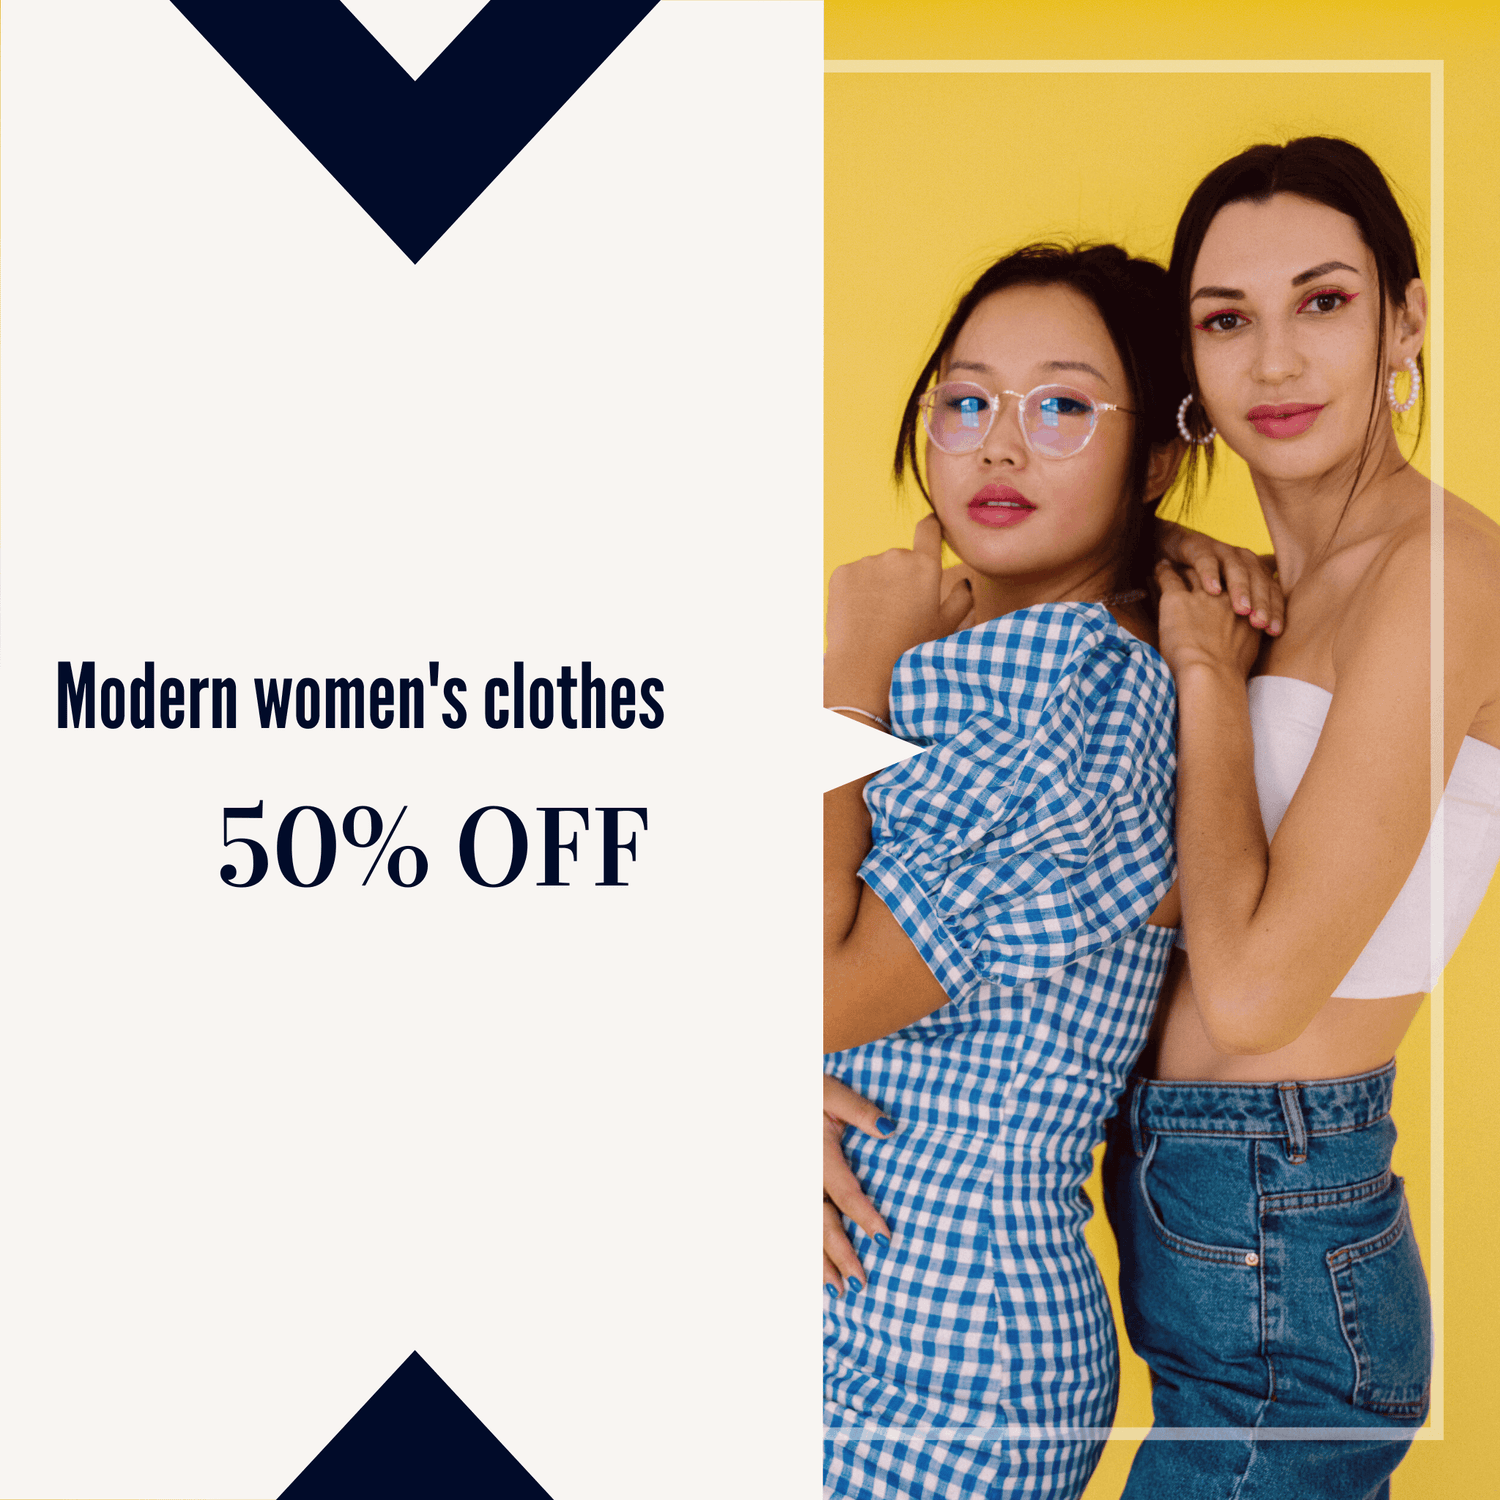 Discover the latest trends and styles for Women all under one roof!